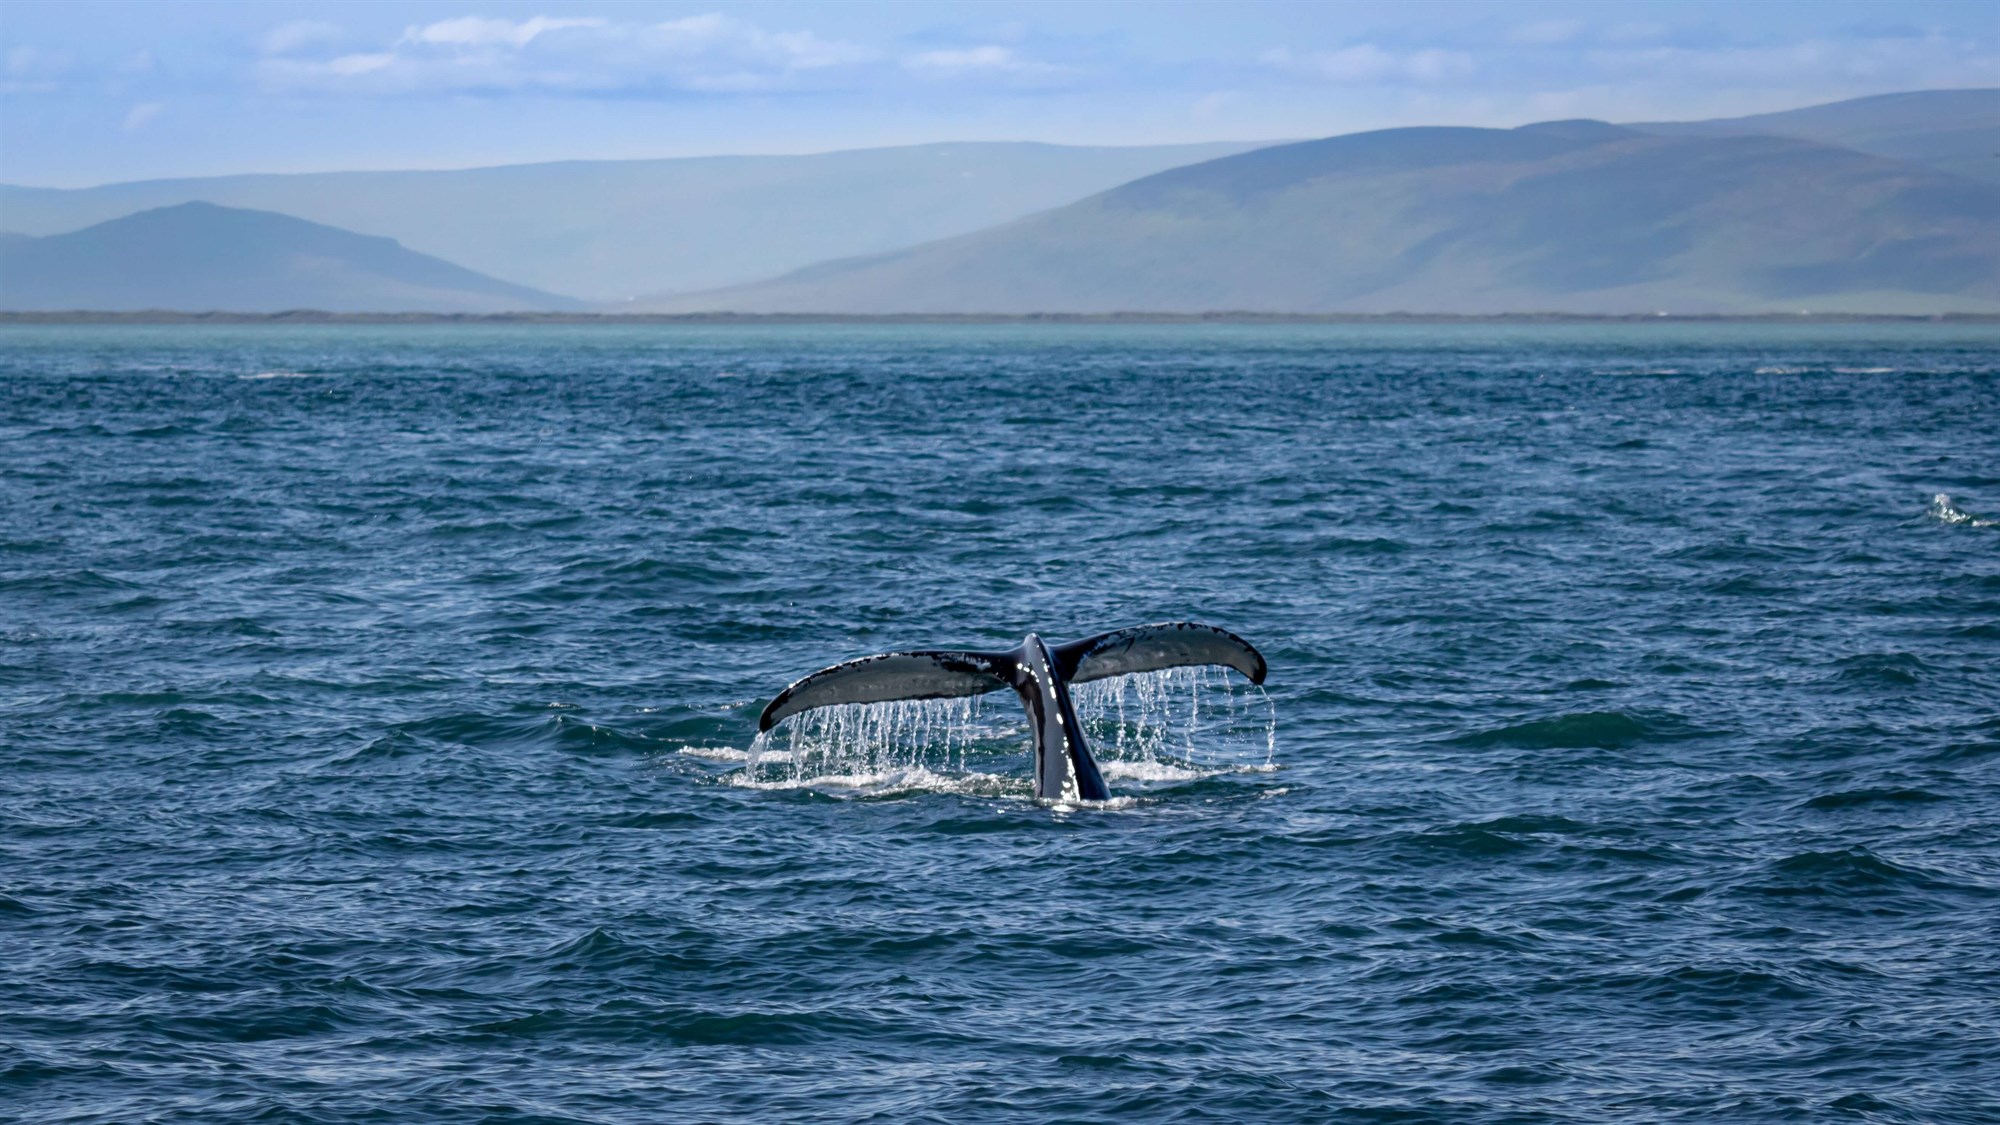 Whale's tail emerging above water in Húsavík, Iceland